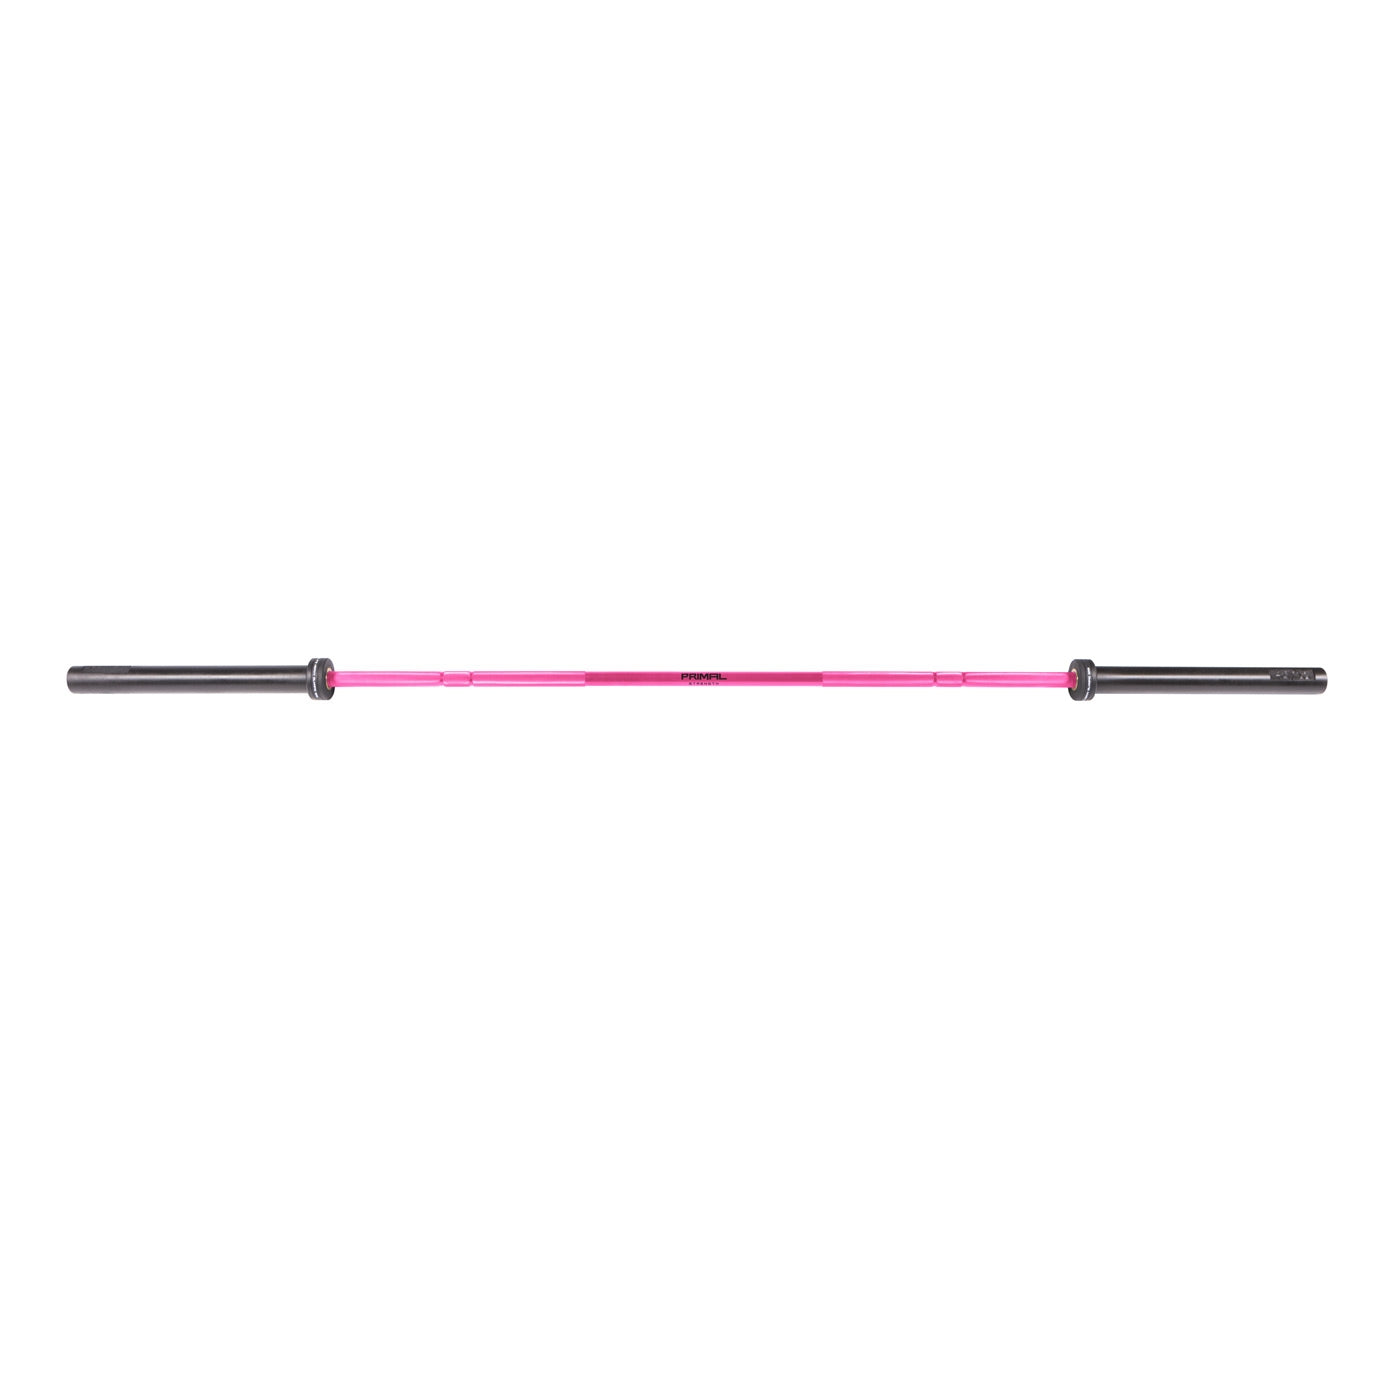 a olympic barbell with black sleeves and pink shaft